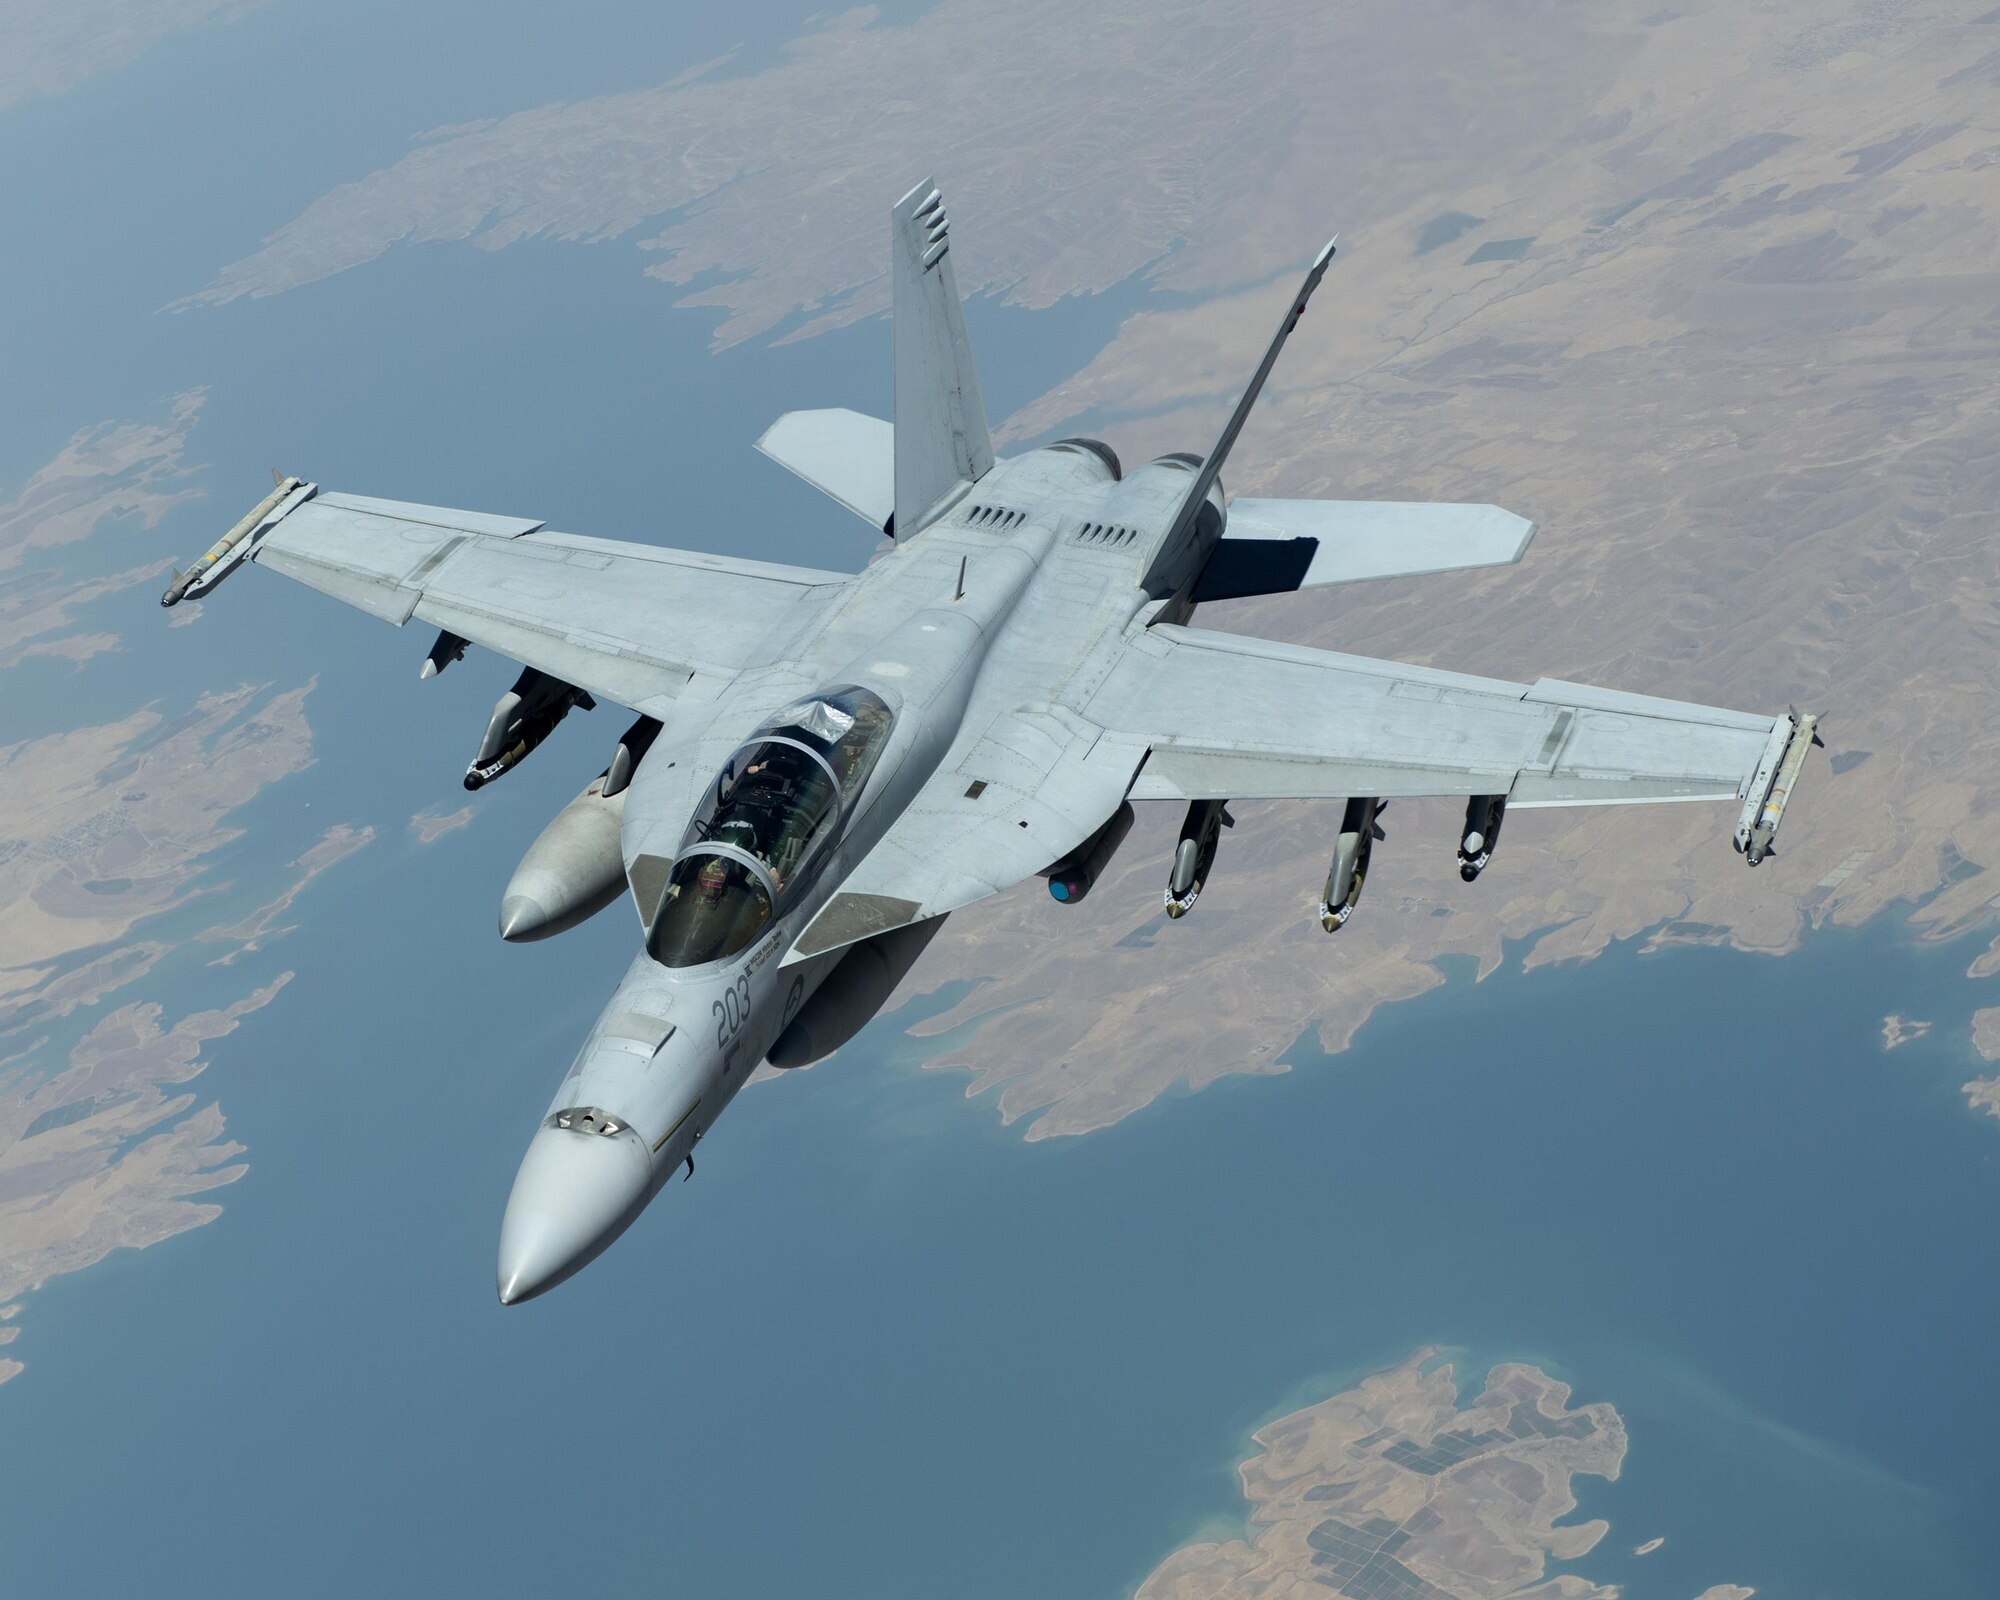 A Royal Australian Air Force EA-18F Super Hornet departs after receiving fuel from a U.S. Air Force KC-135 Stratotanker assigned to 340th Expeditionary Air Refueling Squadron in support of Operation Inherent Resolve on July 1, 2017. The KC-135 Stratotanker provides aerial refueling support to U.S. and coalition aircraft 24/7 throughout the U.S. Air Forces Central Command area of responsibility. (U.S. Air Force photo by Tech. Sgt. Amy M. Lovgren)